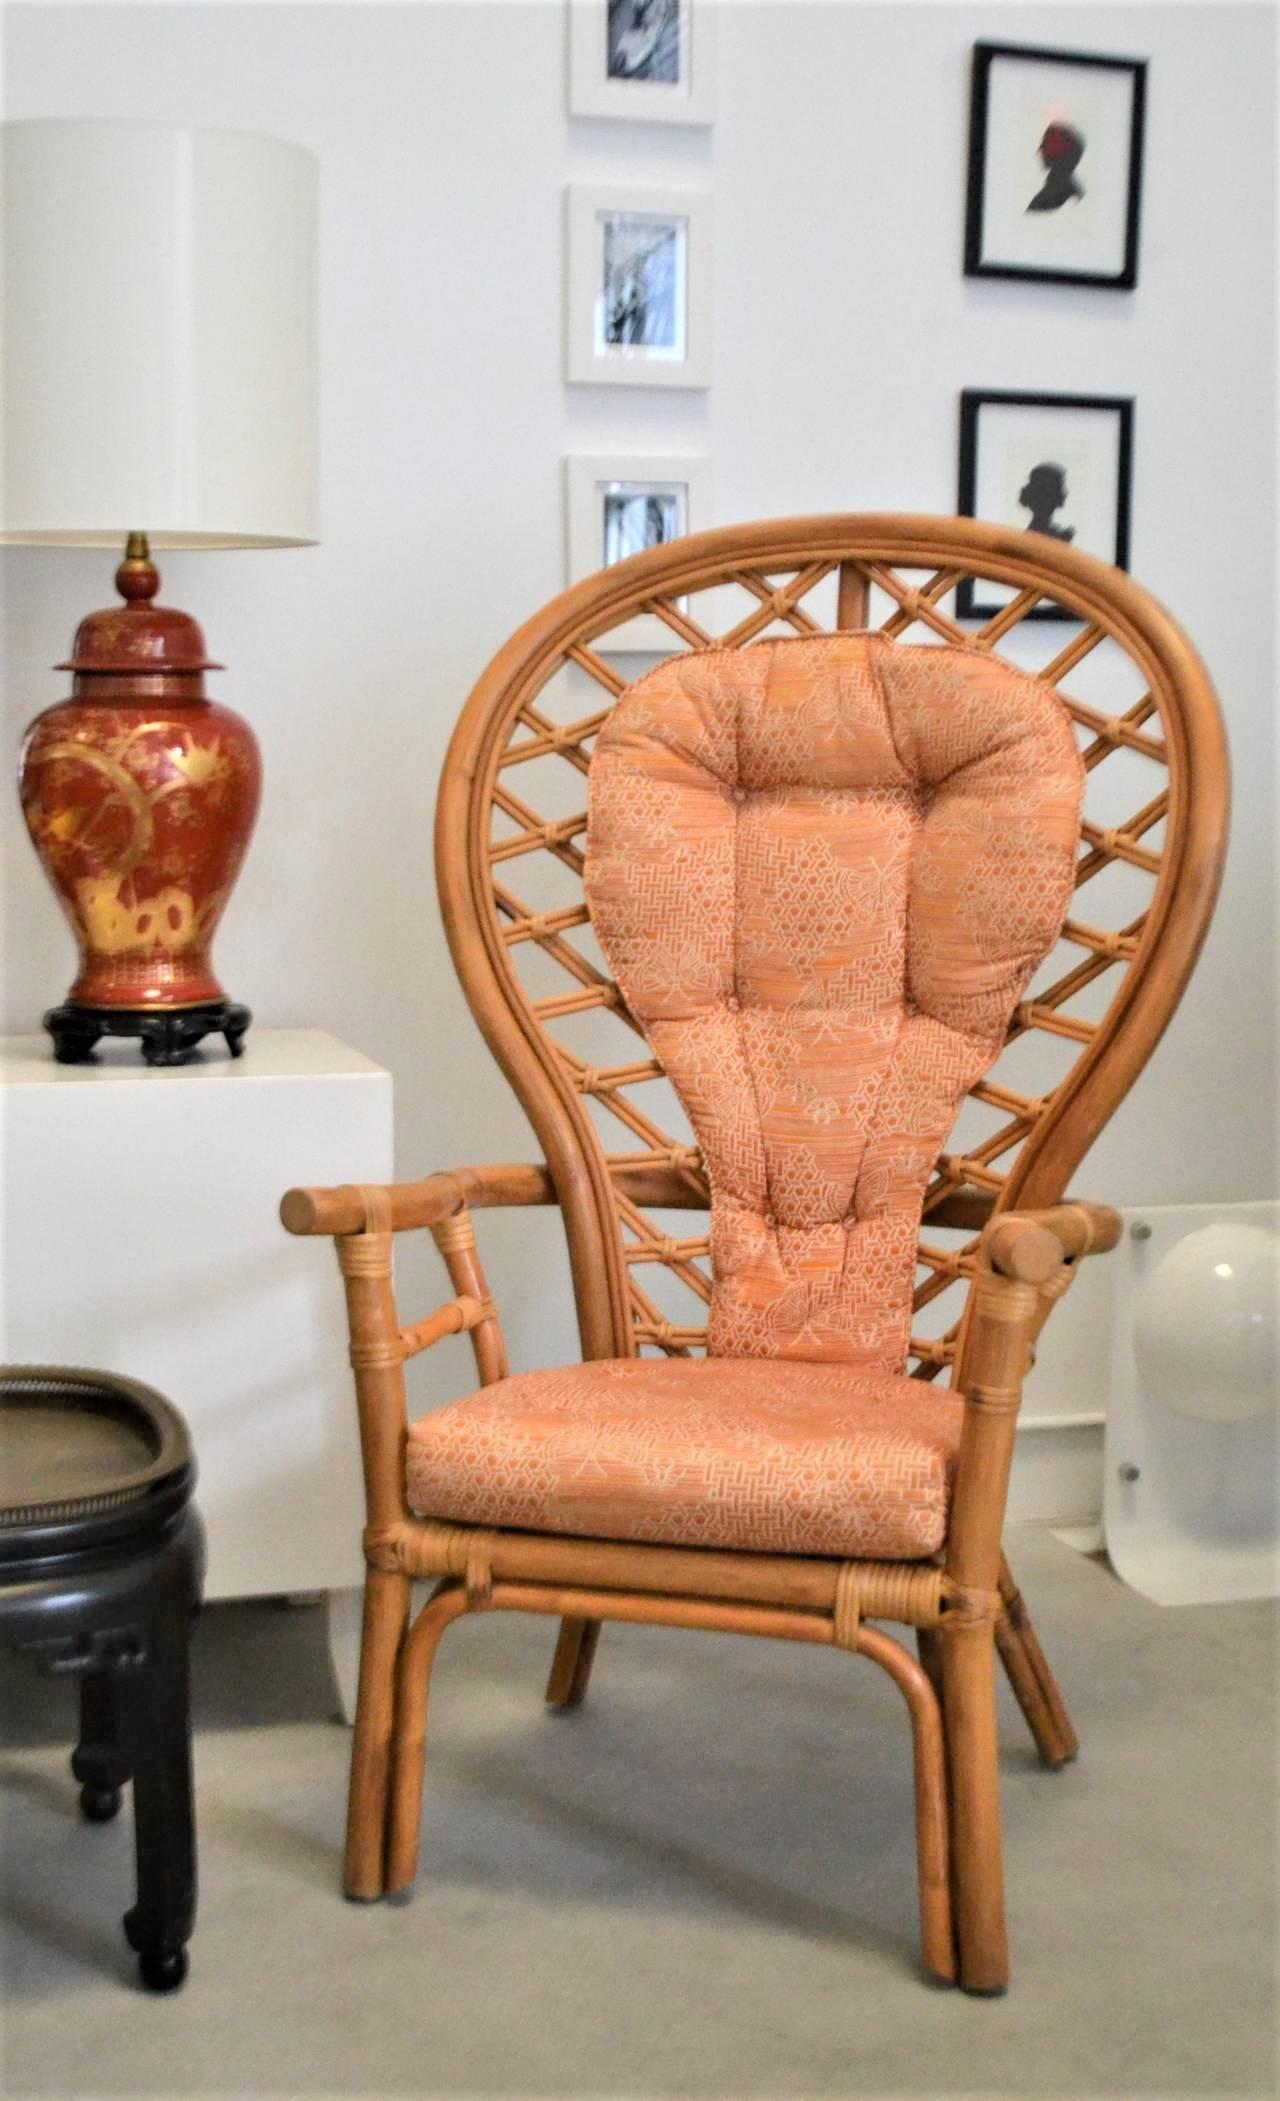 Striking midcentury sculptural bent bamboo fan back armchair, circa 1960s-1970s. This decorative peacock occasional chair is designed with an upholstered seat and tufted back cushion and accented with an intricately woven rattan back.
Measures: 49